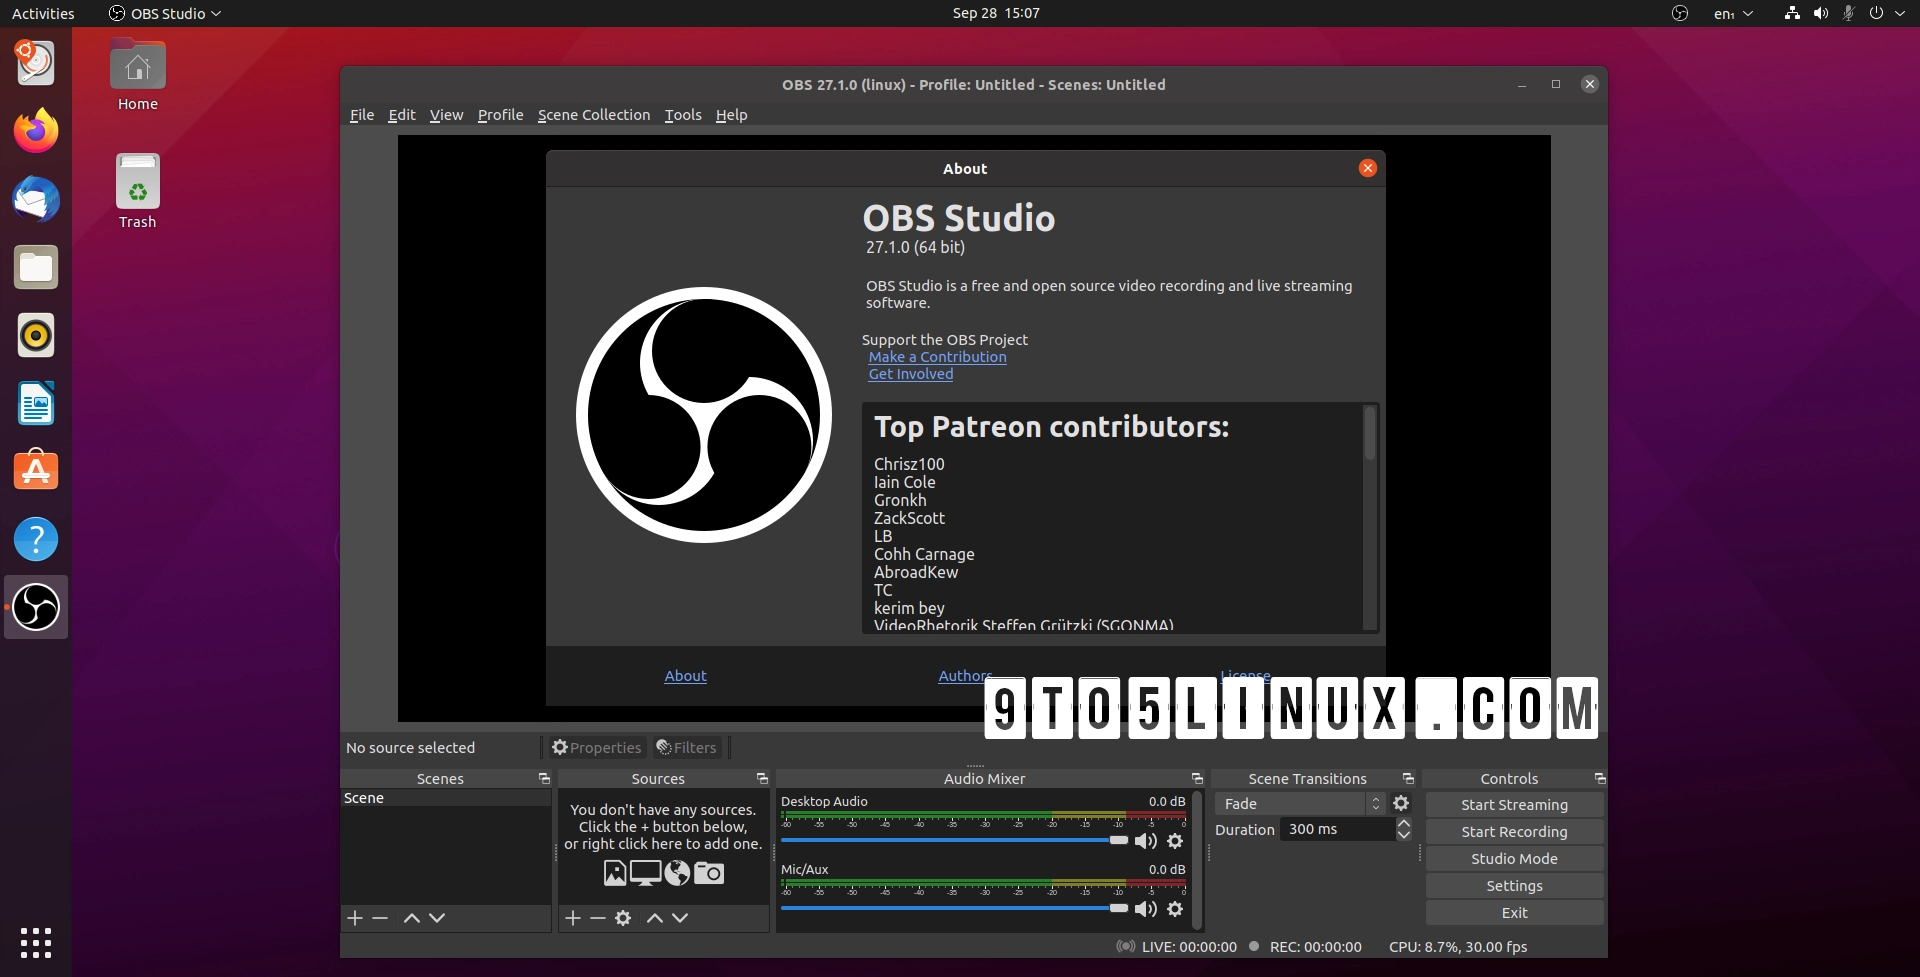 OBS Studio 27.1 Released with YouTube Integration, 18-Scene MultiView Option, and More